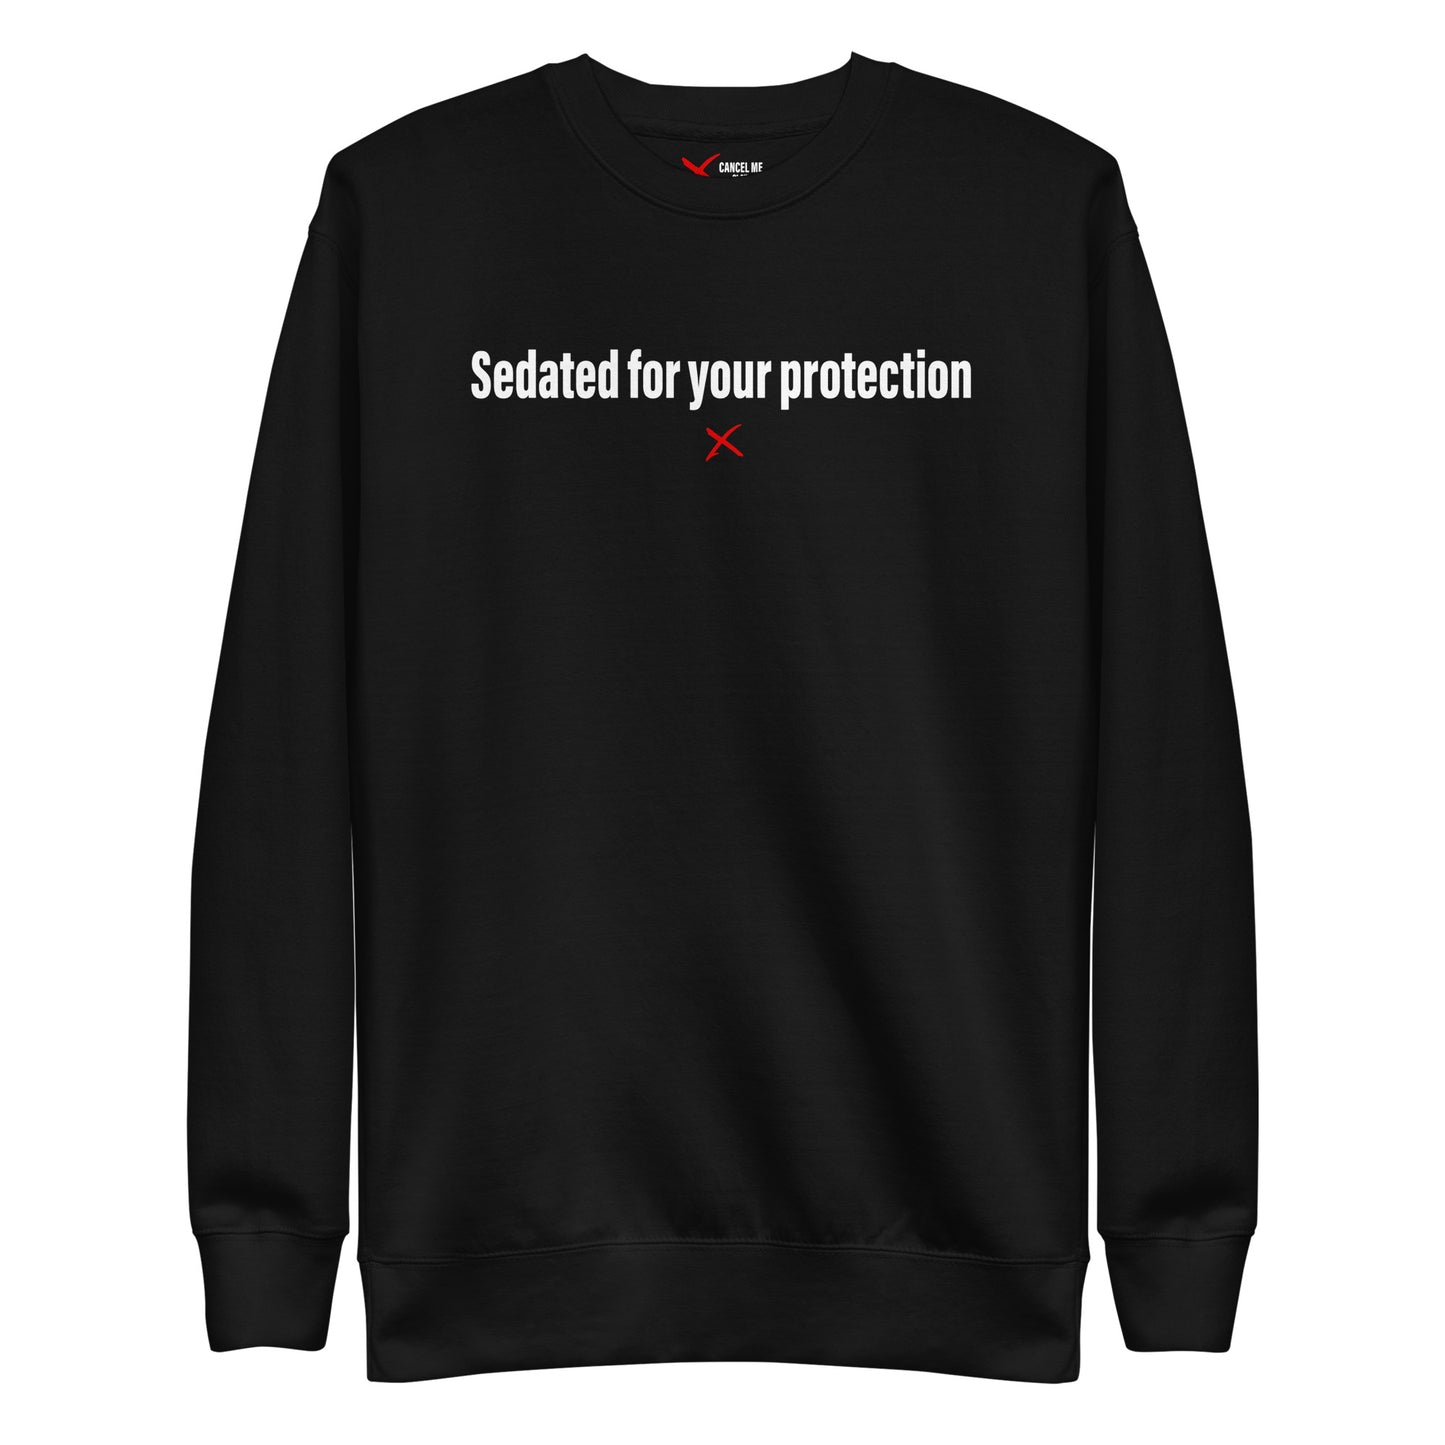 Sedated for your protection - Sweatshirt